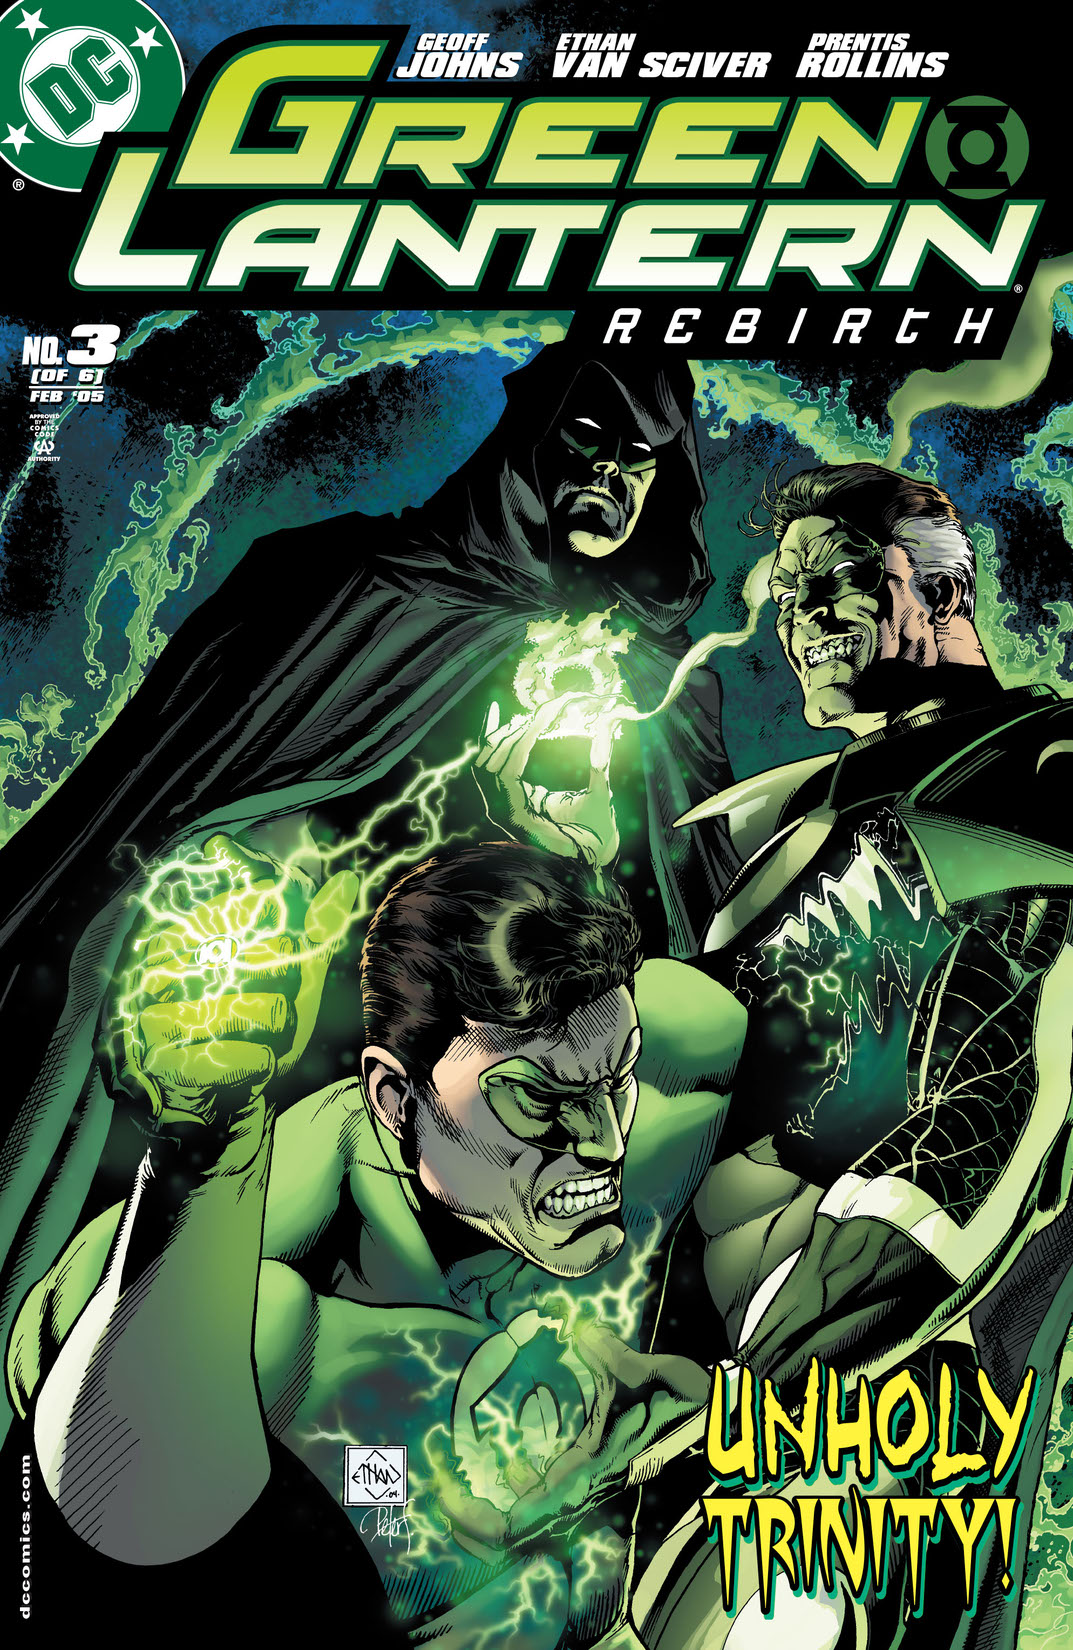 Green Lantern: Rebirth #3 preview images